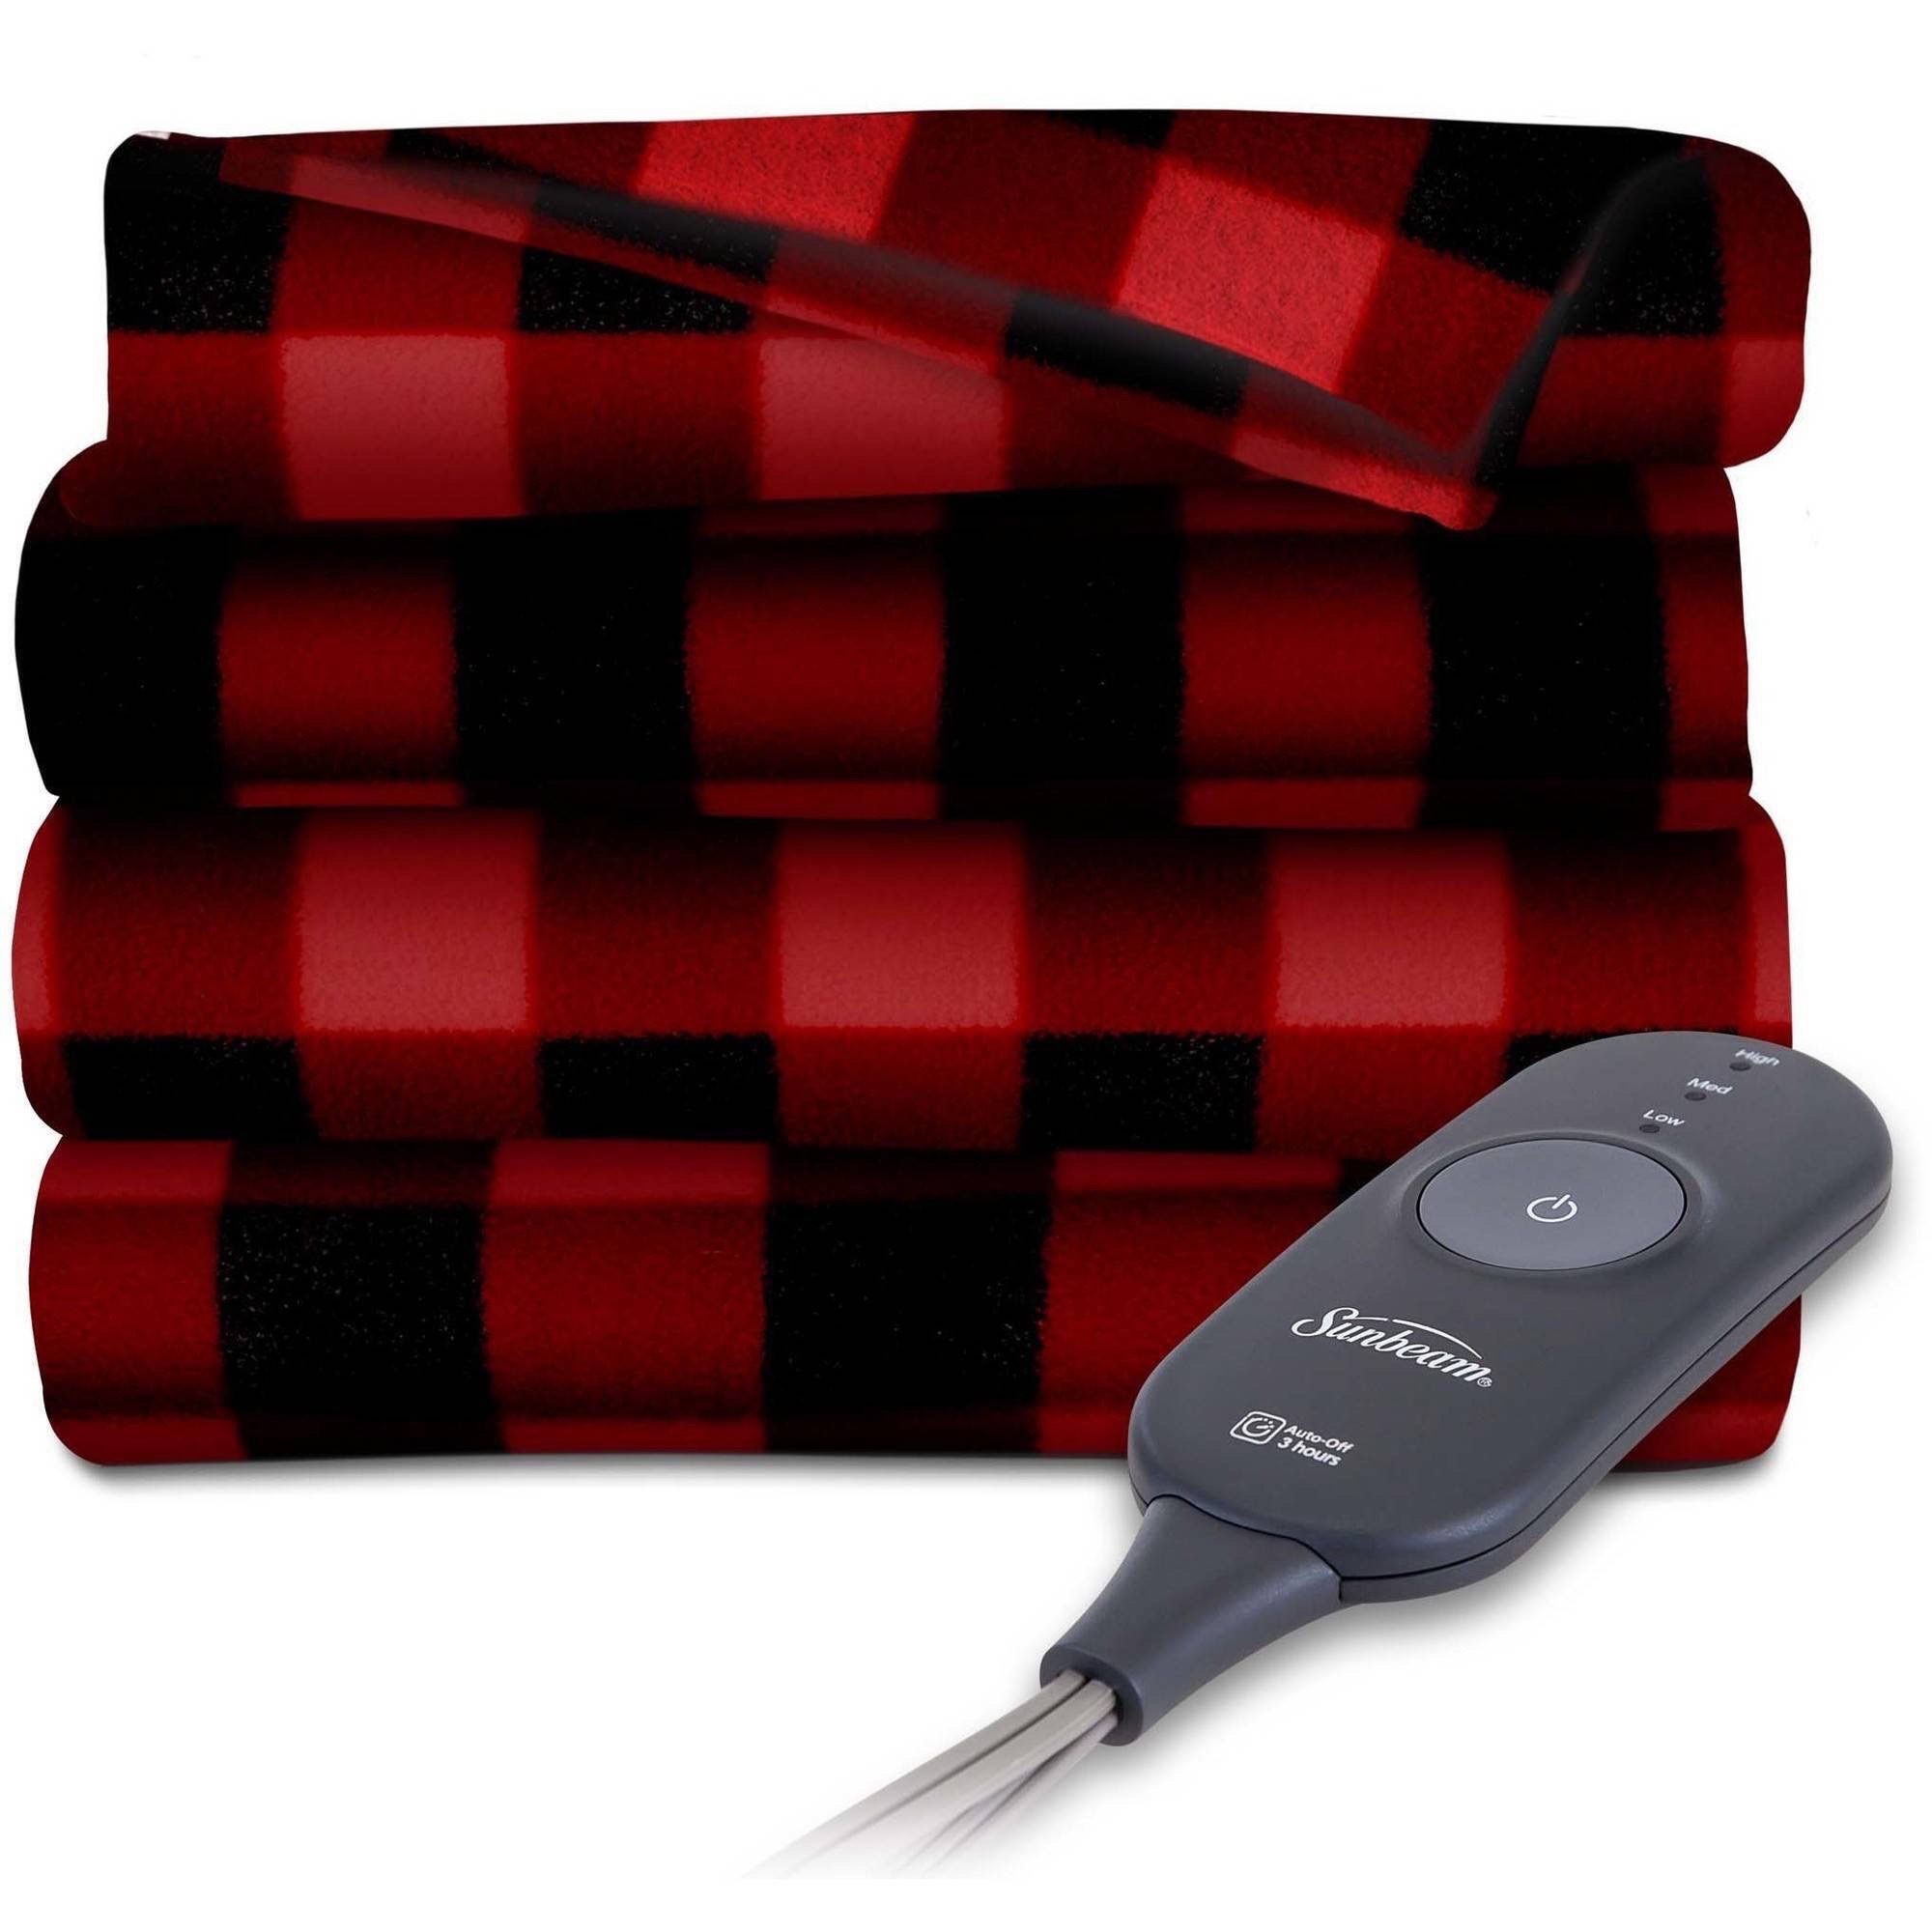 Sunbeam Electric Heated Fleece Throw Blanket, 60-Inch by 50-Inch - image 1 of 2